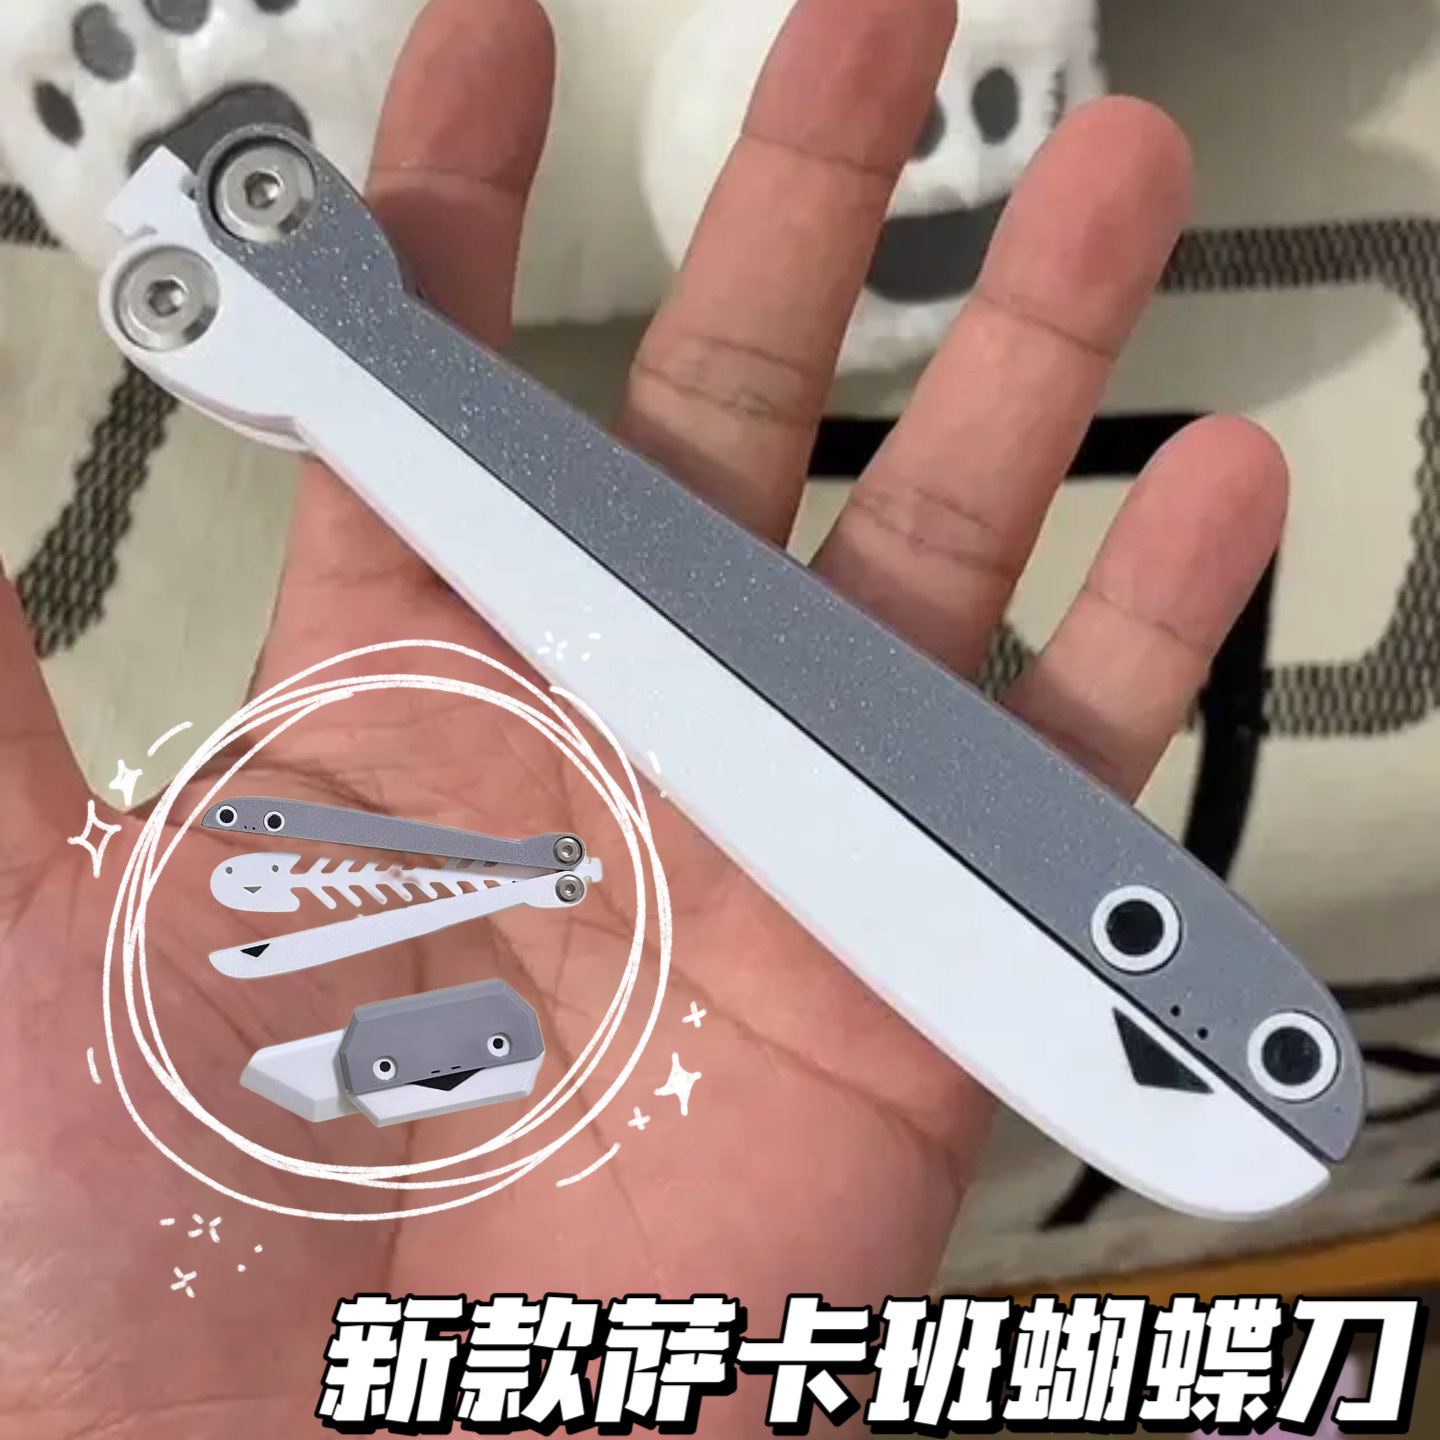 New Internet Celebrity Sacban Turtle Butterfly Knife Decompression Toy 3D Printing Radish Knife Butterfly Knife for Wholesale